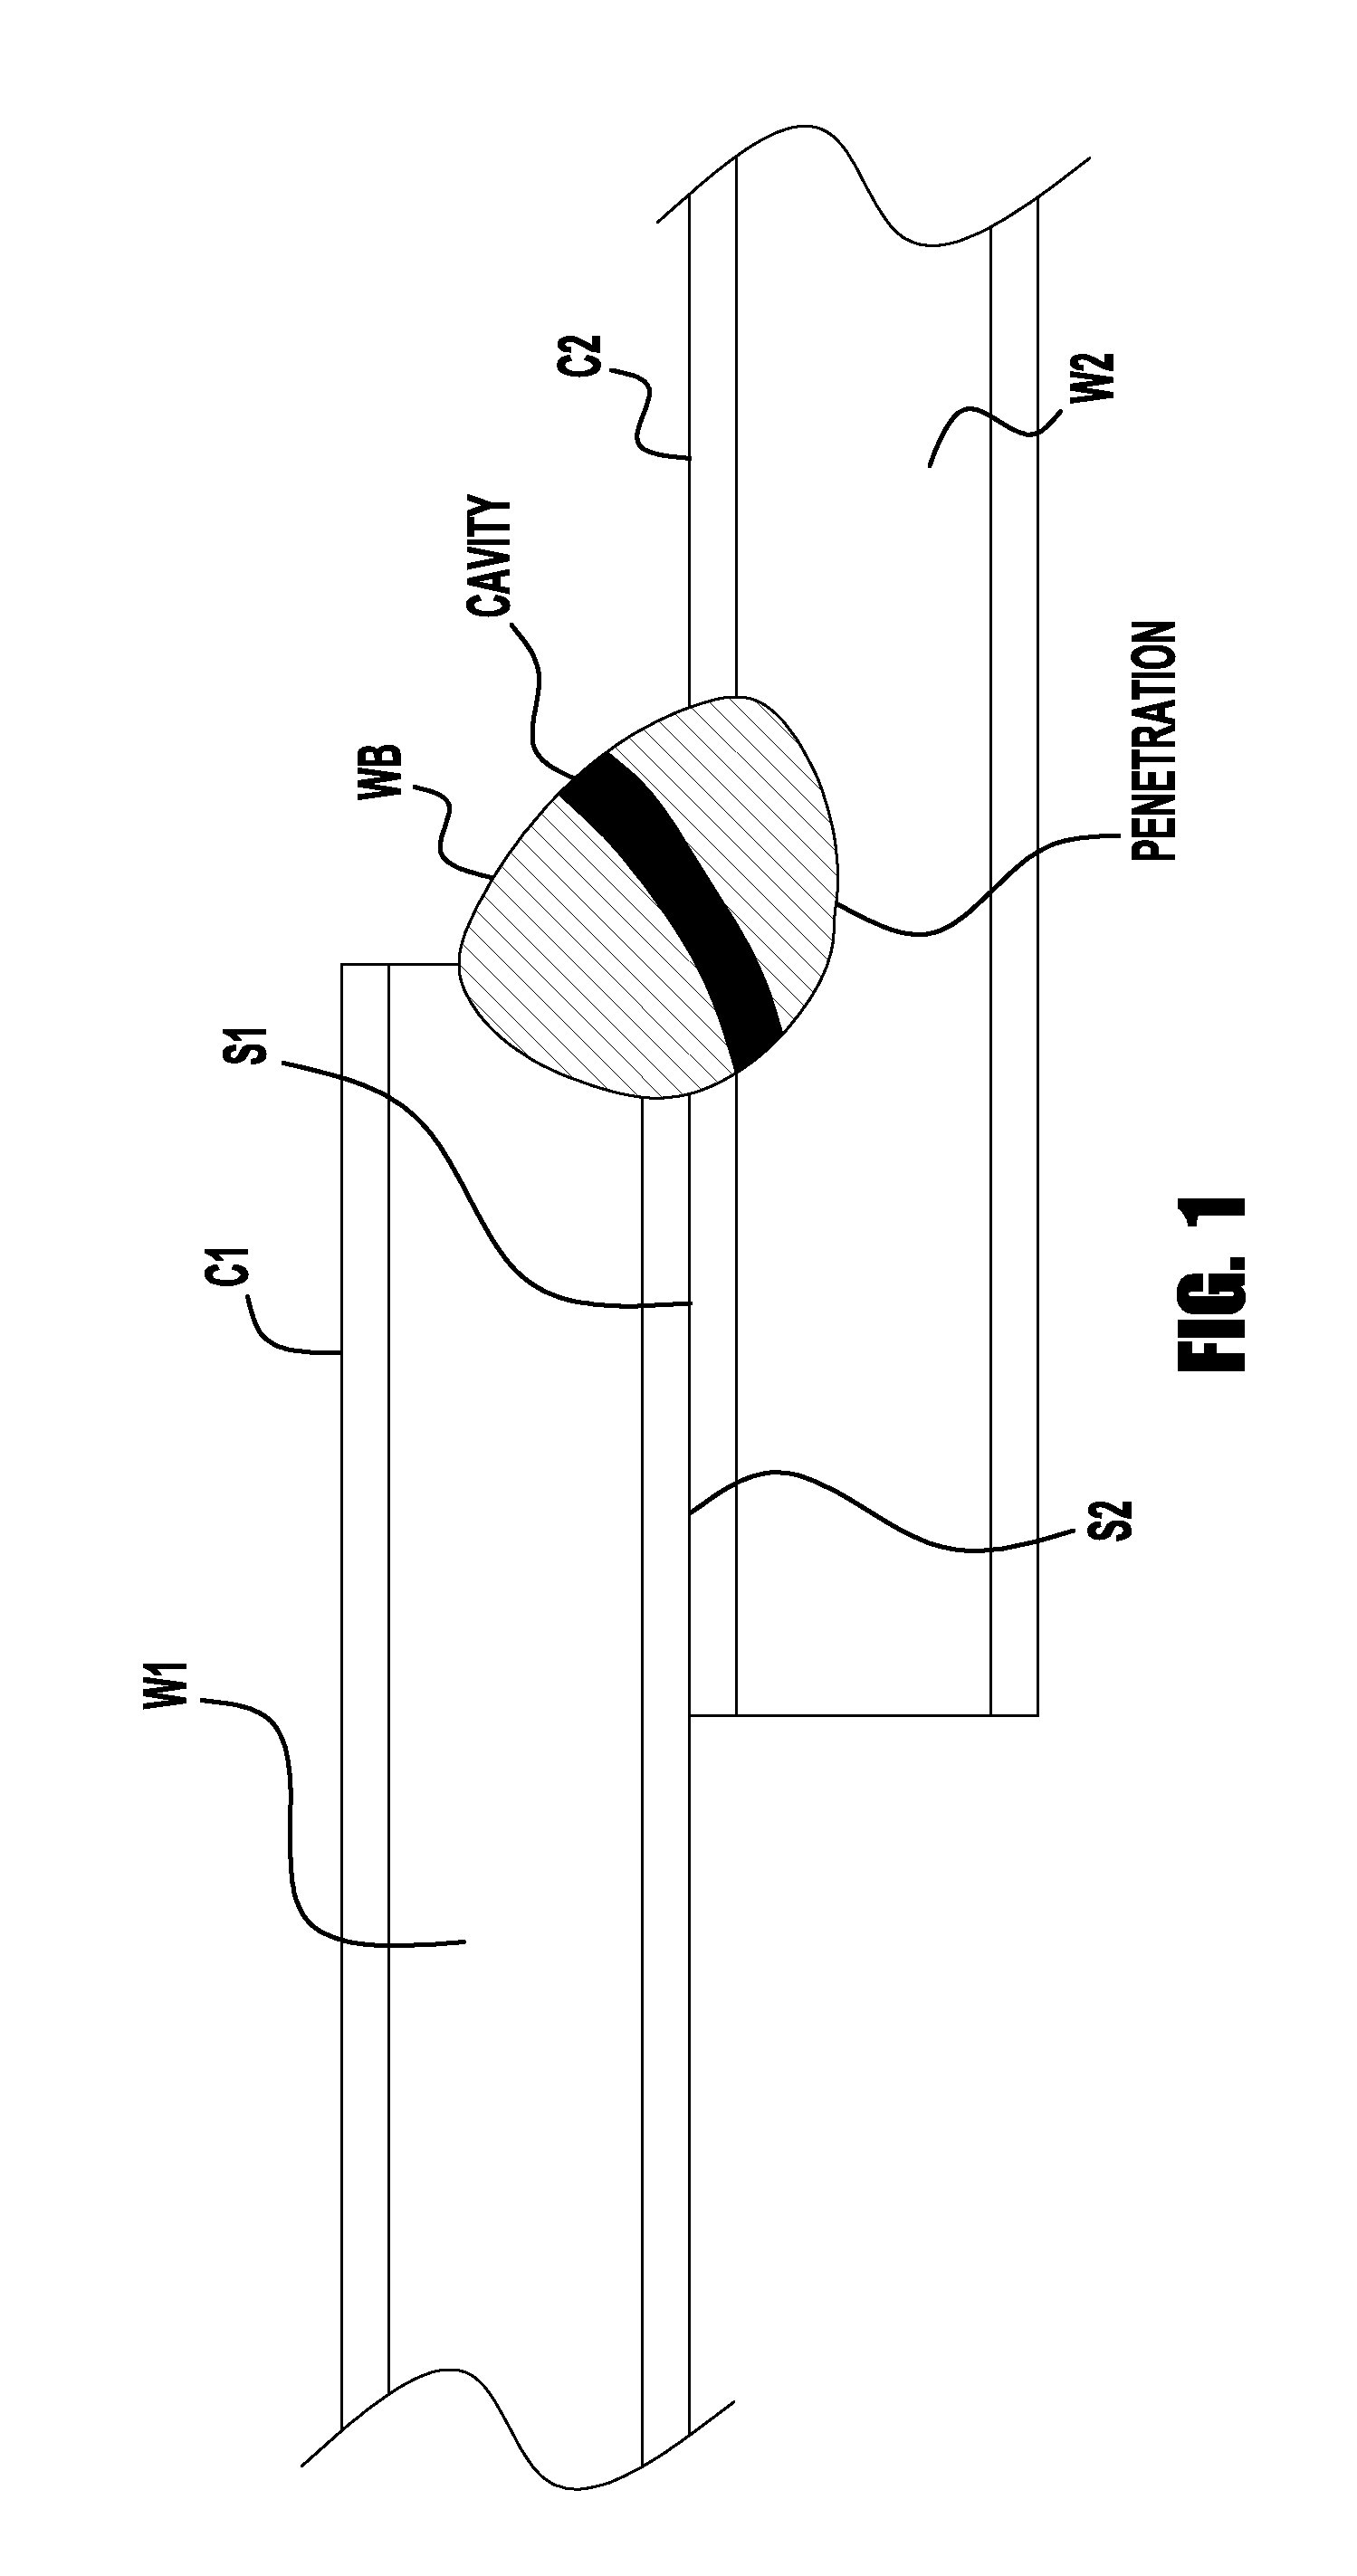 Apparatus and method for post weld laser release of gas build up in a gmaw weld